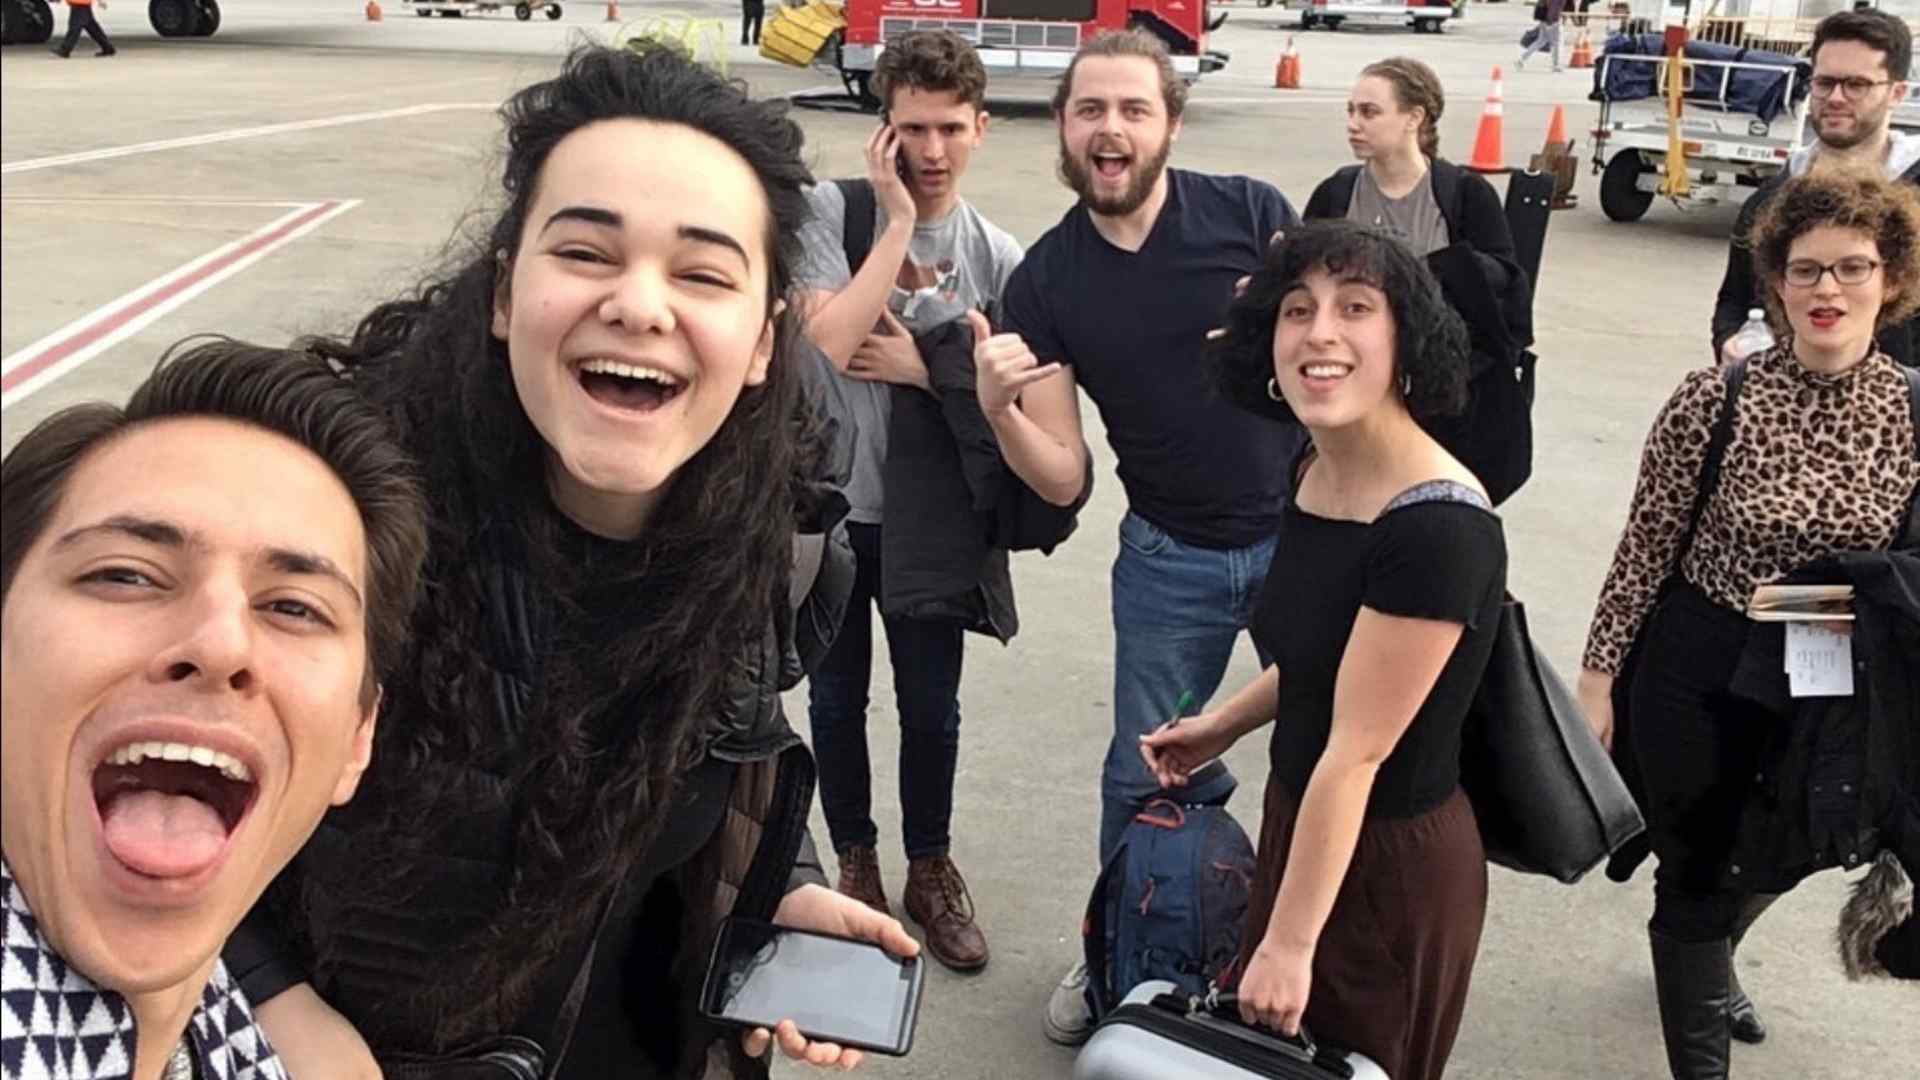 A group selfie of the Dido and Aeneas cast at an airport